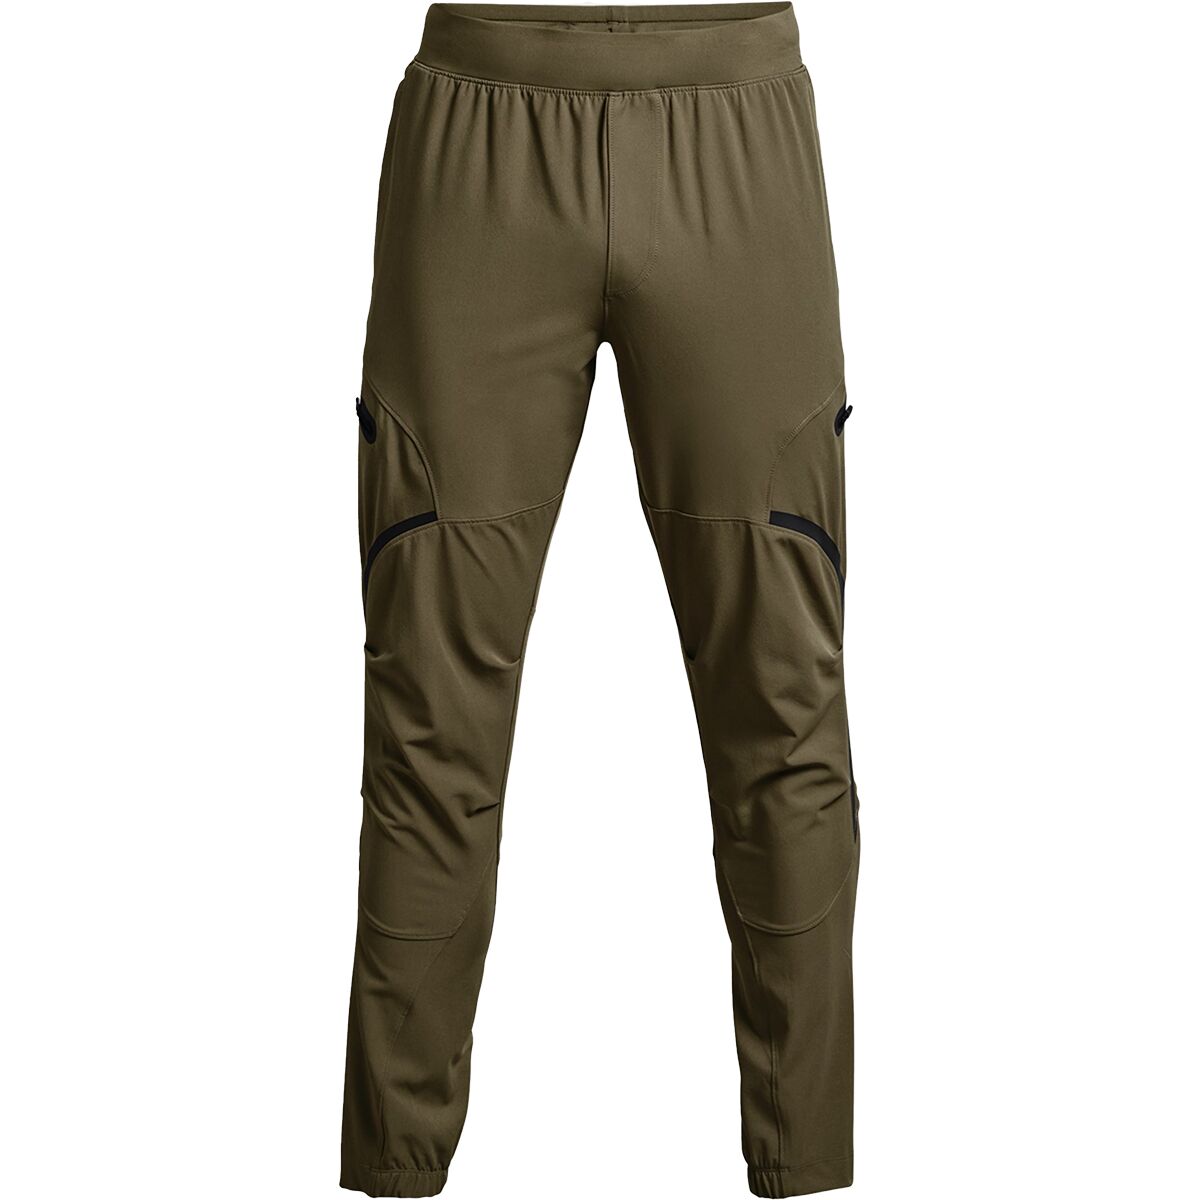 Under Armour Unstoppable Cargo Pant - Men's - Clothing